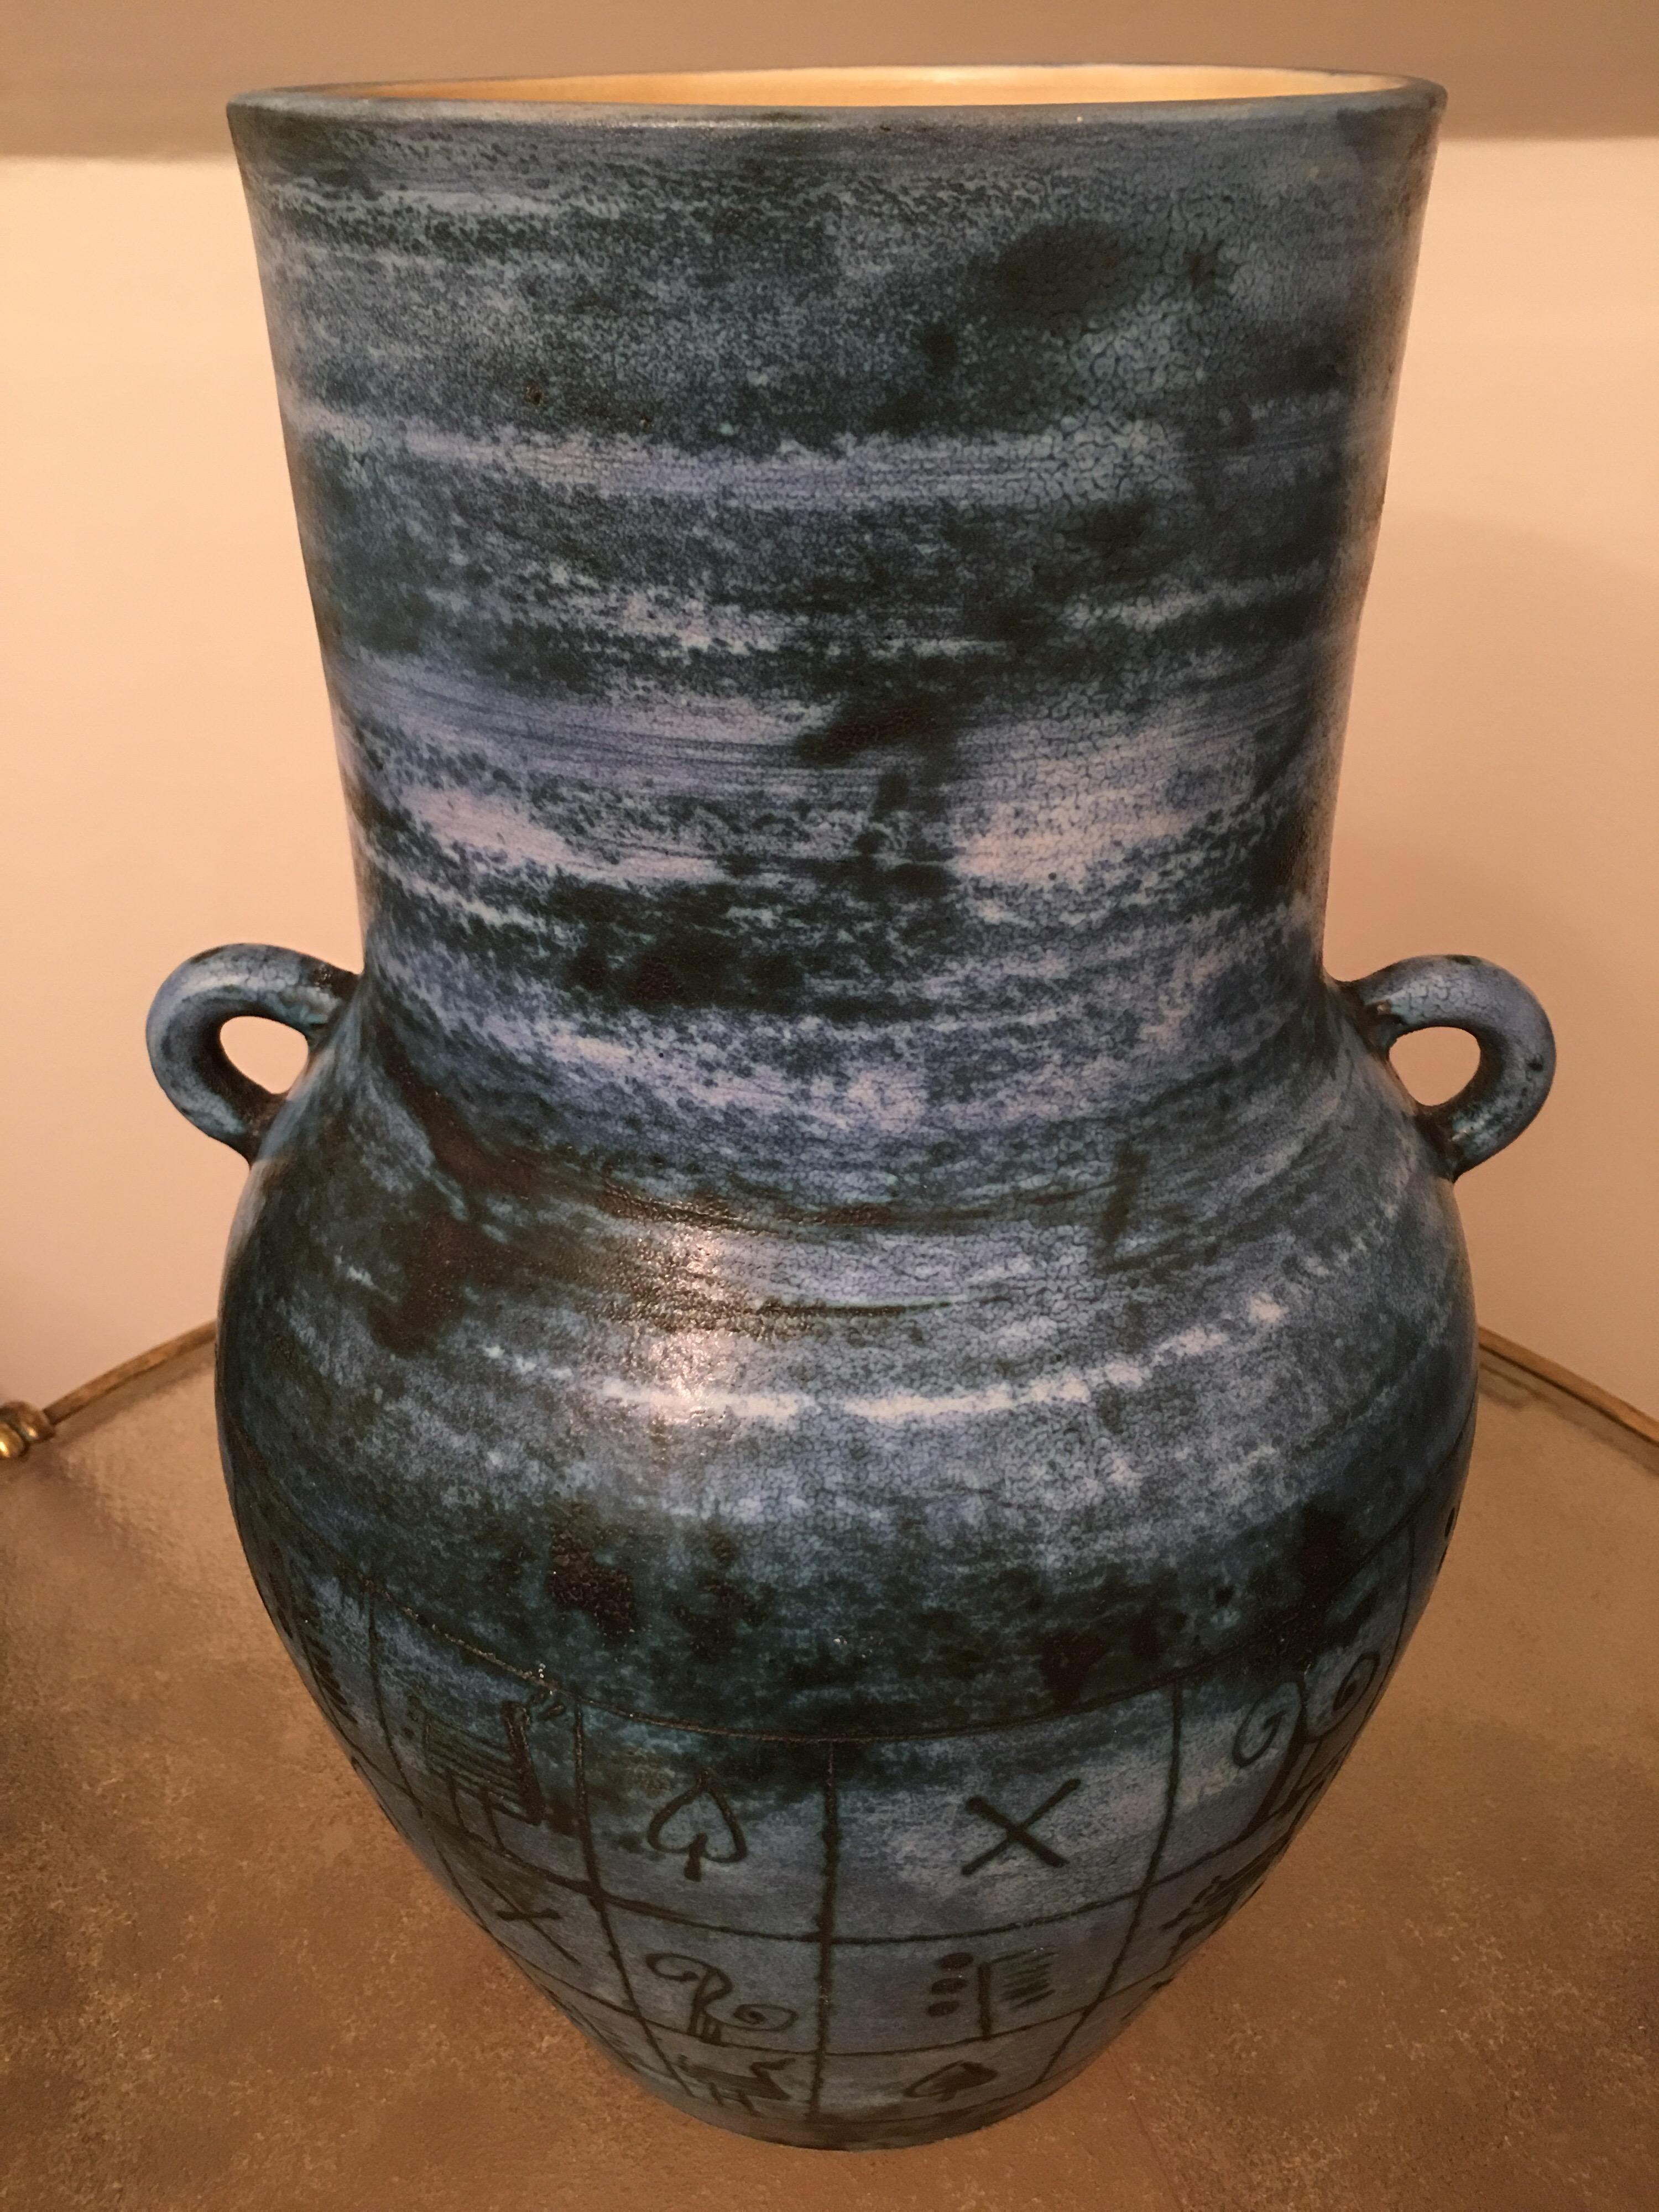 Rare large ceramic vase with incised decoration of animals and stylized geometric motifs, black patina on blue background.
Underside J Blin signed
Jacques Blin (1920-1995 ) is a famous French ceramist
Documentation: Histoire de l'atelier Jacques